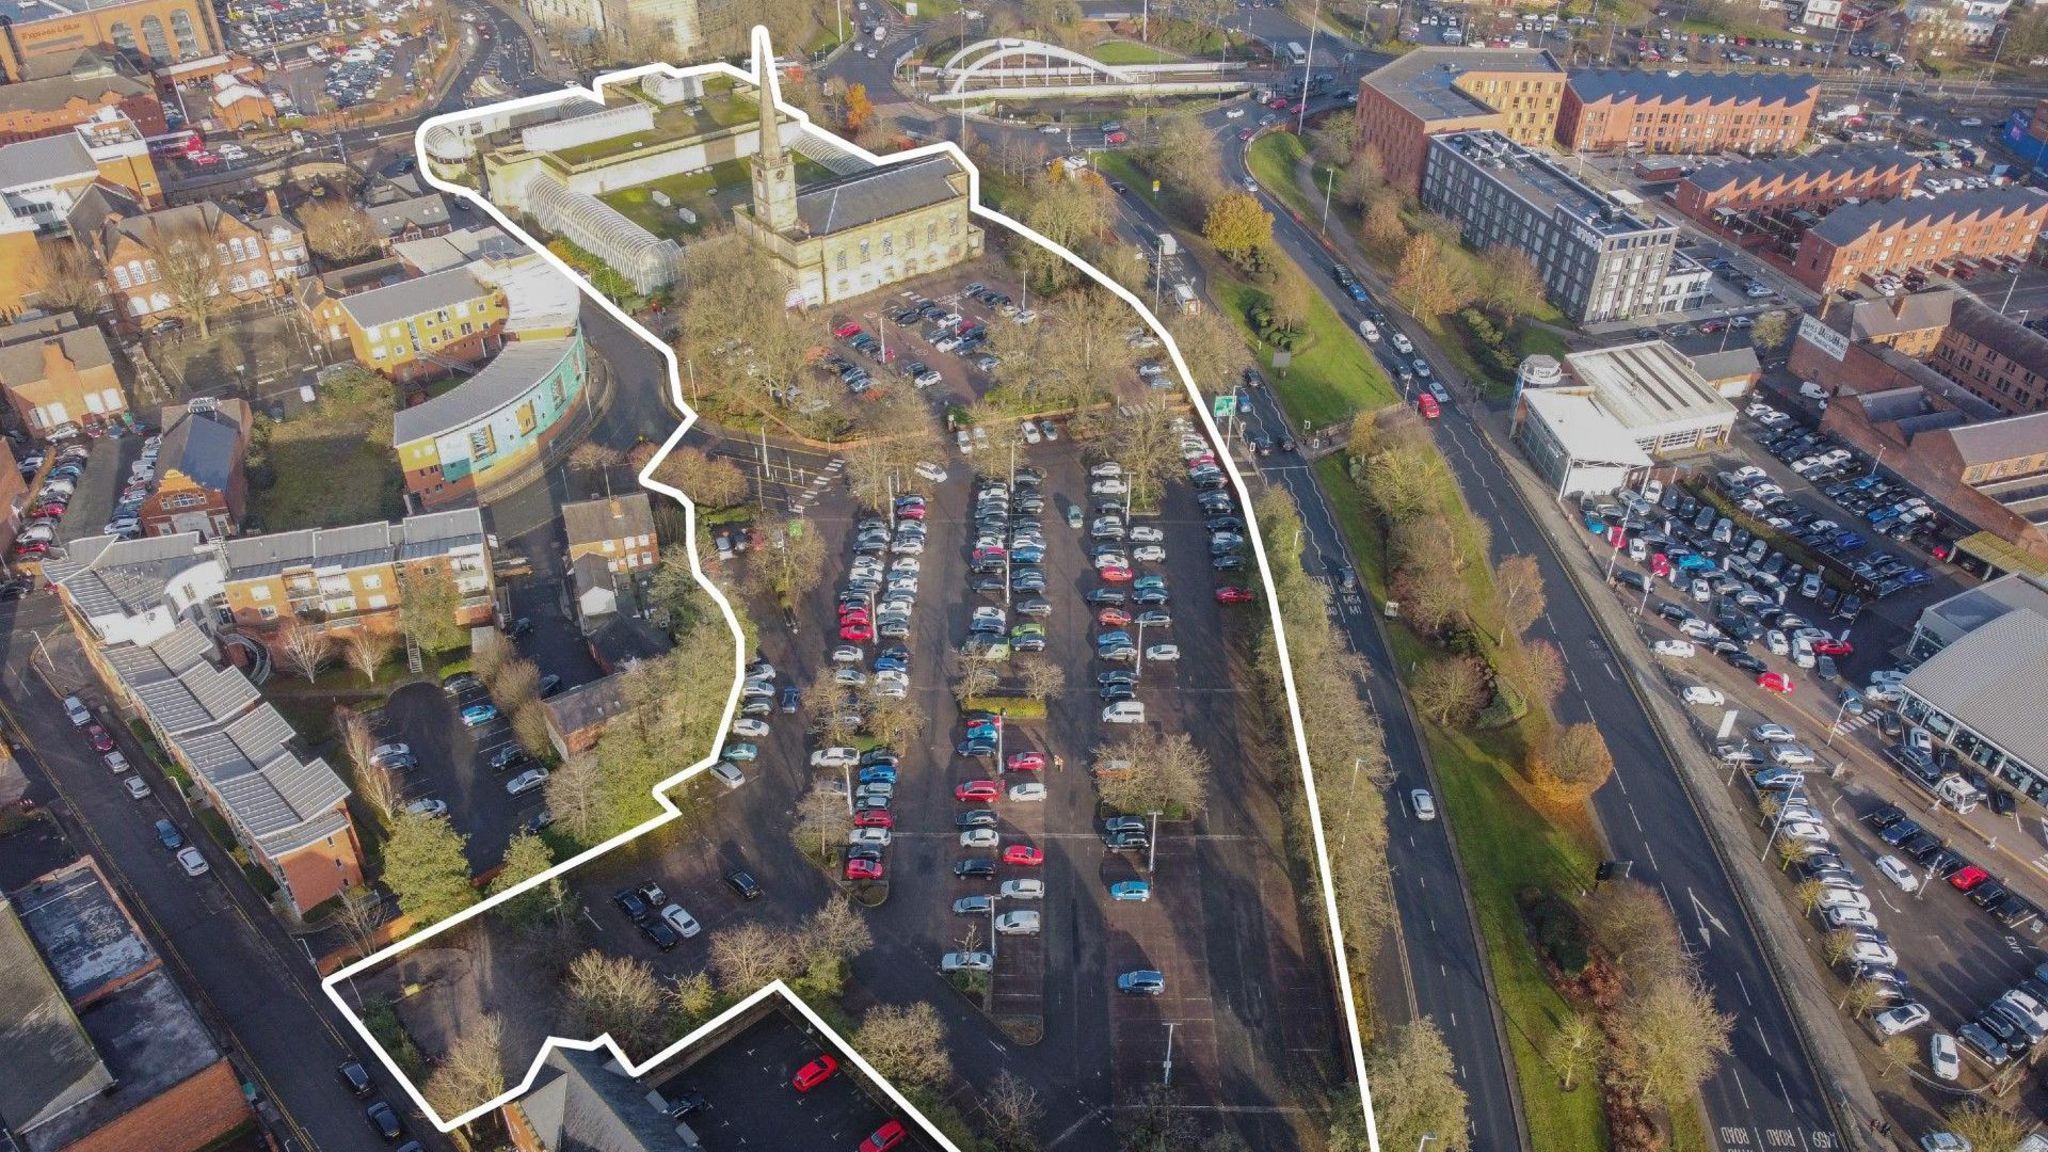 An aerial view of the St George's site in Wolverhampton